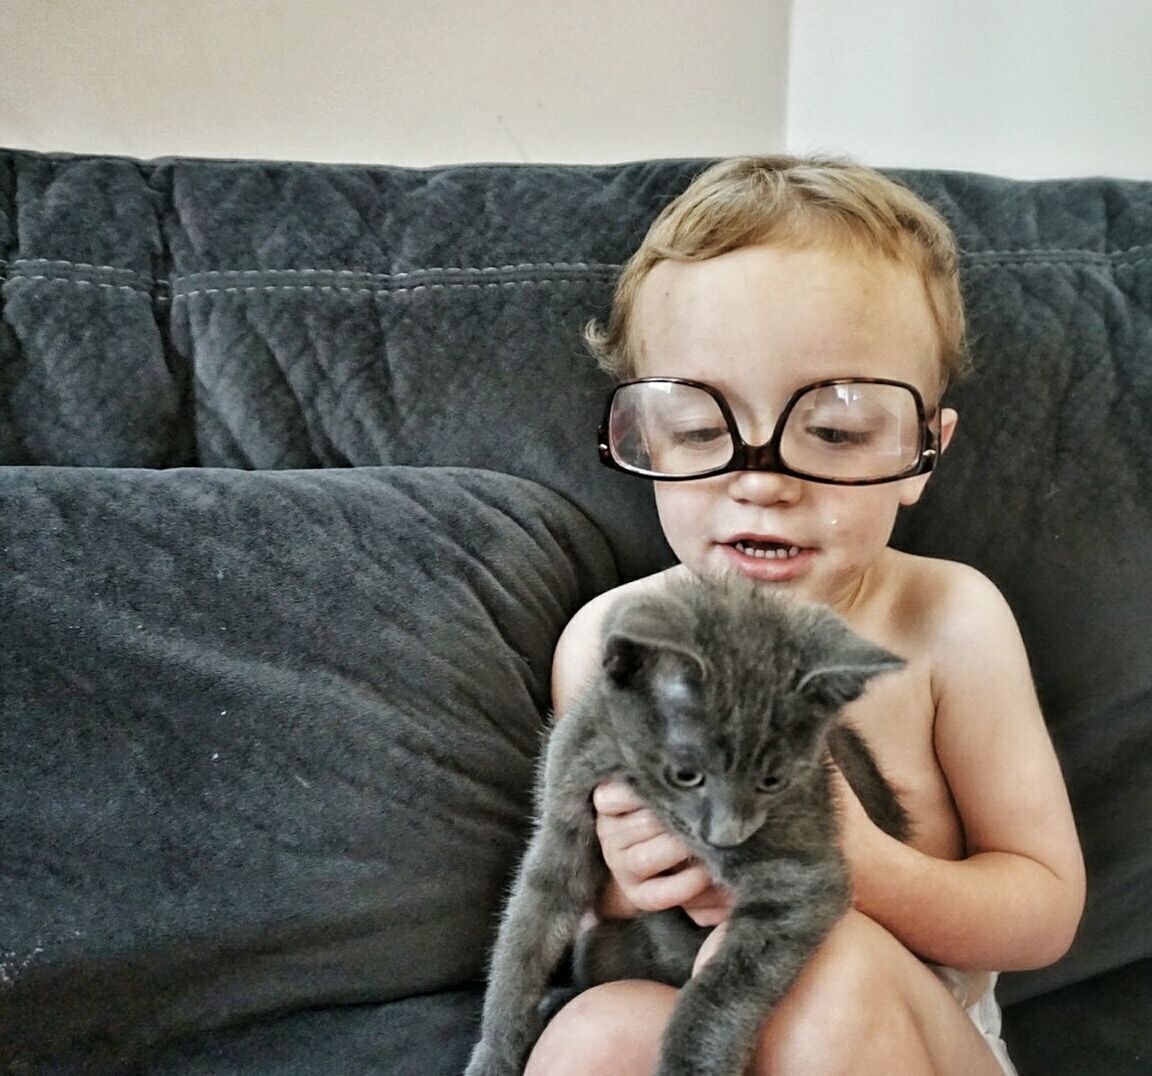 Boy holding cat while sitting on sofa at home